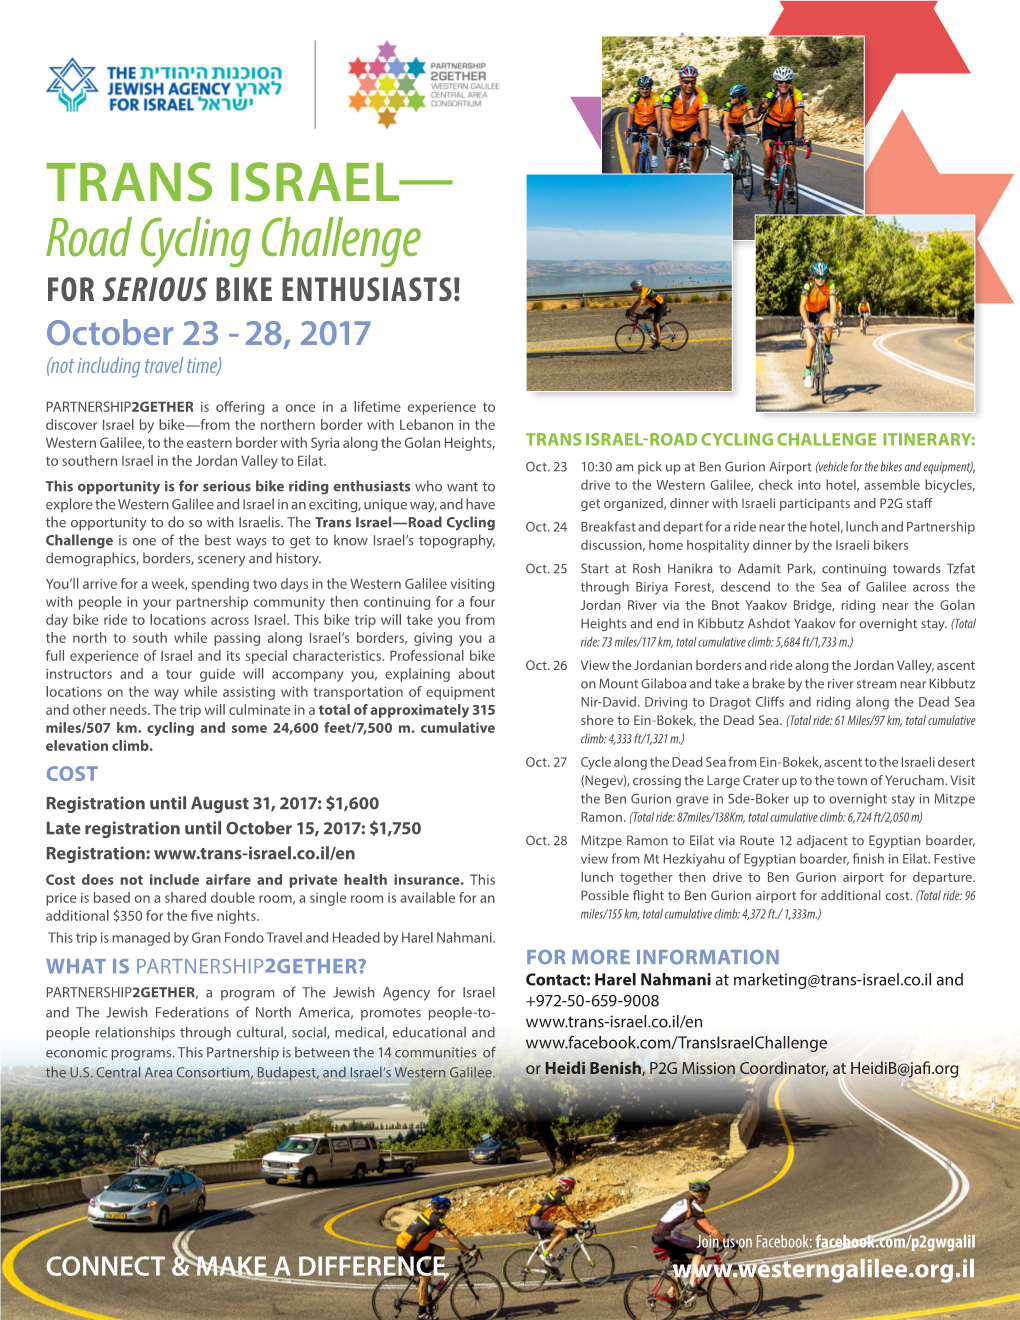 TRANS ISRAEL— Road Cycling Challenge for SERIOUS BIKE ENTHUSIASTS! October 23 - 28, 2017 (Not Including Travel Time)